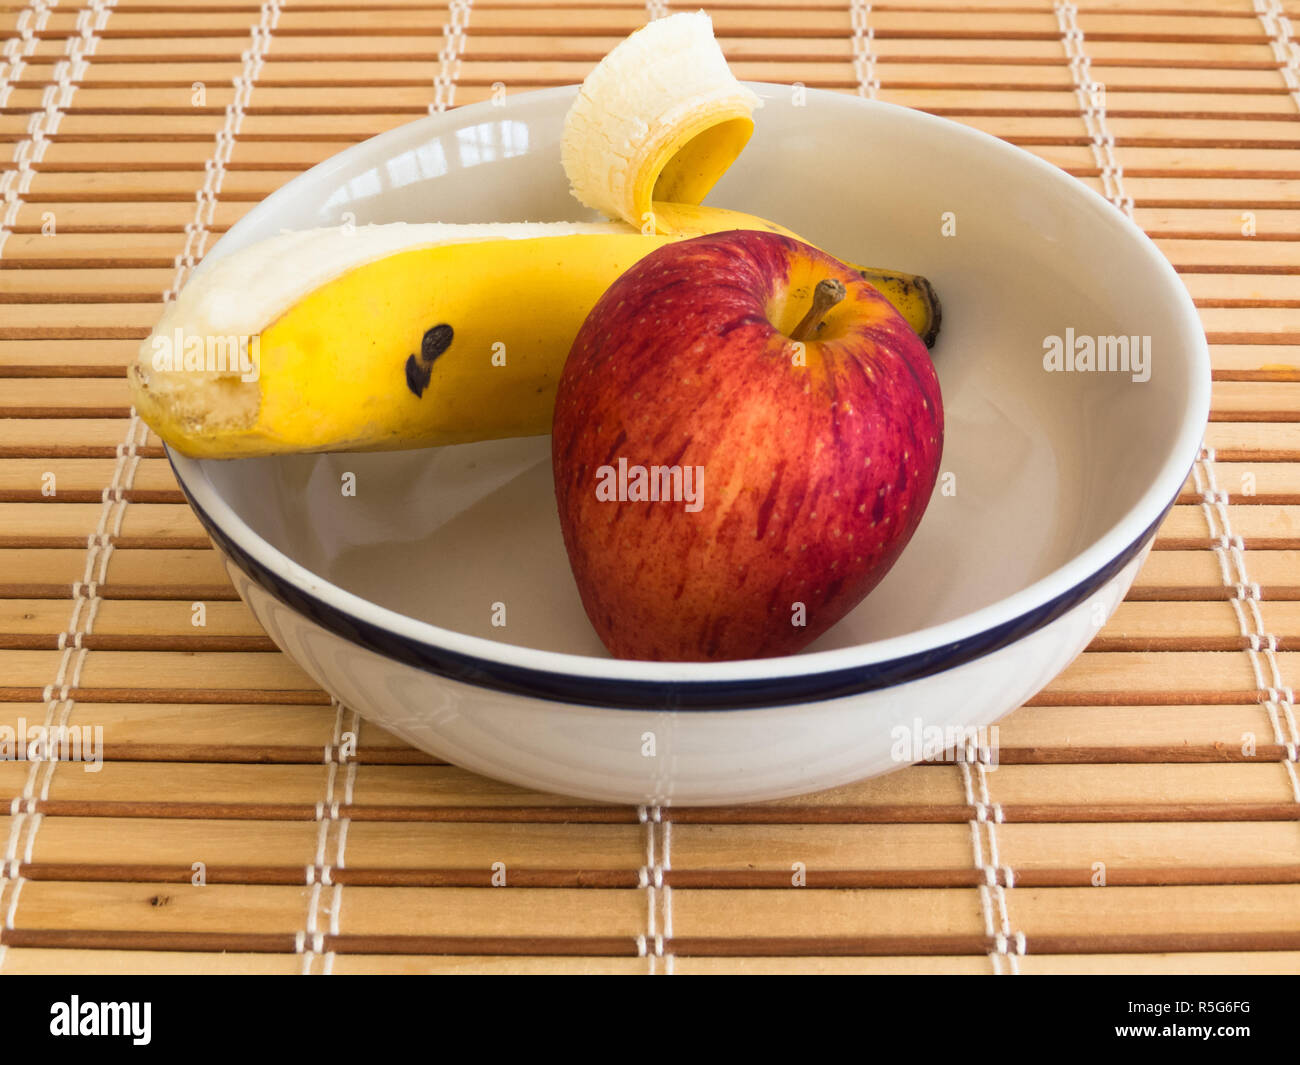 Apple and banana inside bowl on wooden stripes table Stock Photo